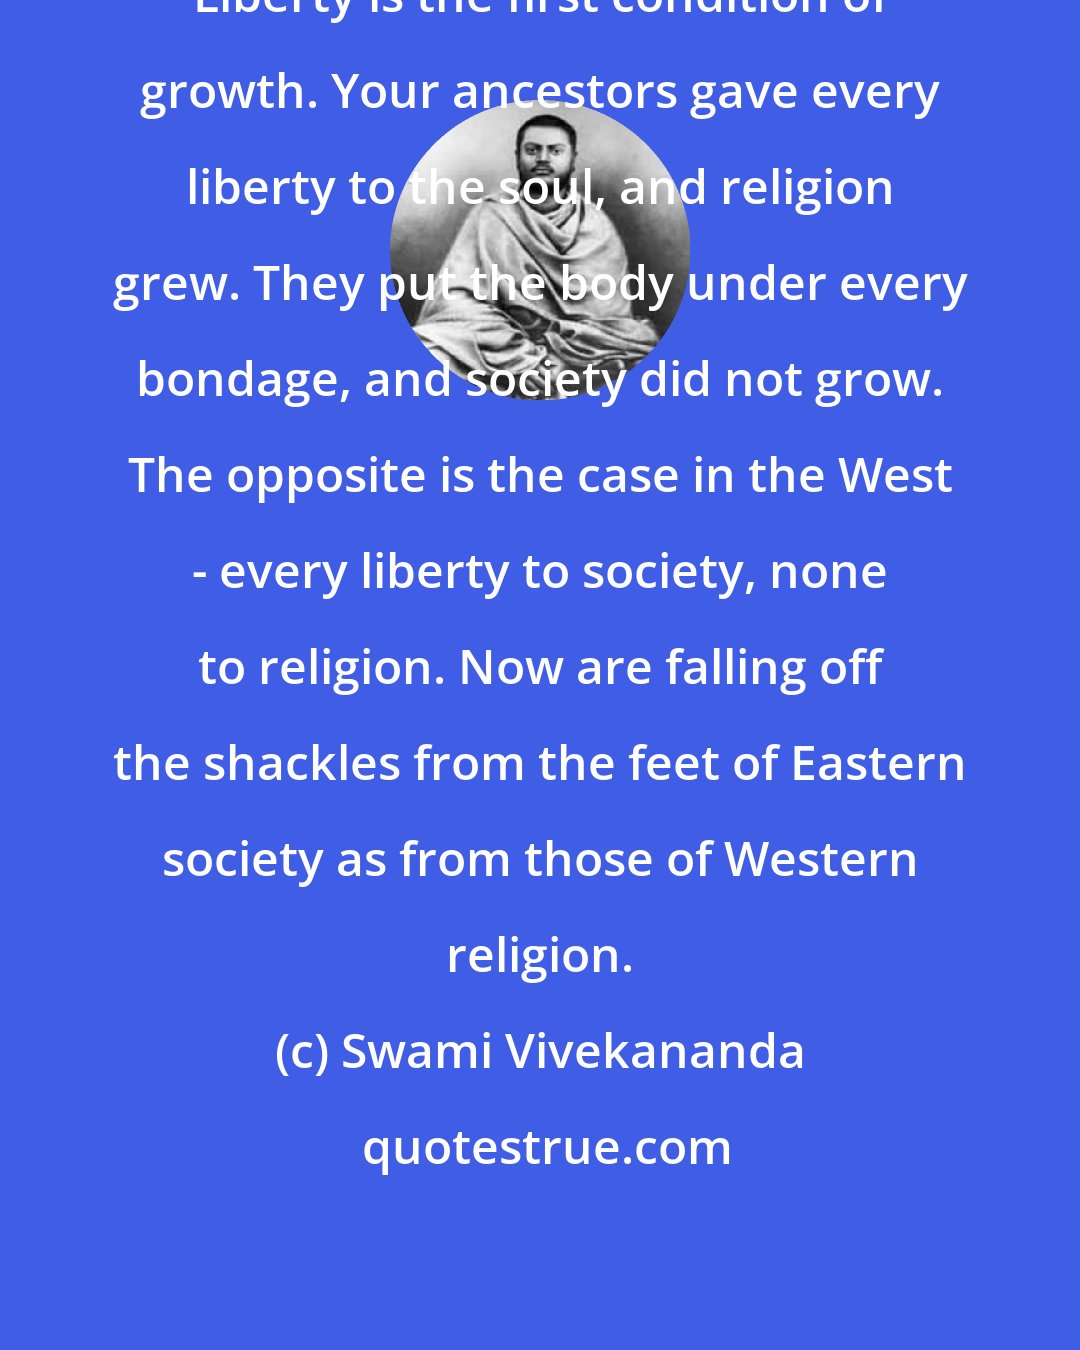 Swami Vivekananda: Liberty is the first condition of growth. Your ancestors gave every liberty to the soul, and religion grew. They put the body under every bondage, and society did not grow. The opposite is the case in the West - every liberty to society, none to religion. Now are falling off the shackles from the feet of Eastern society as from those of Western religion.